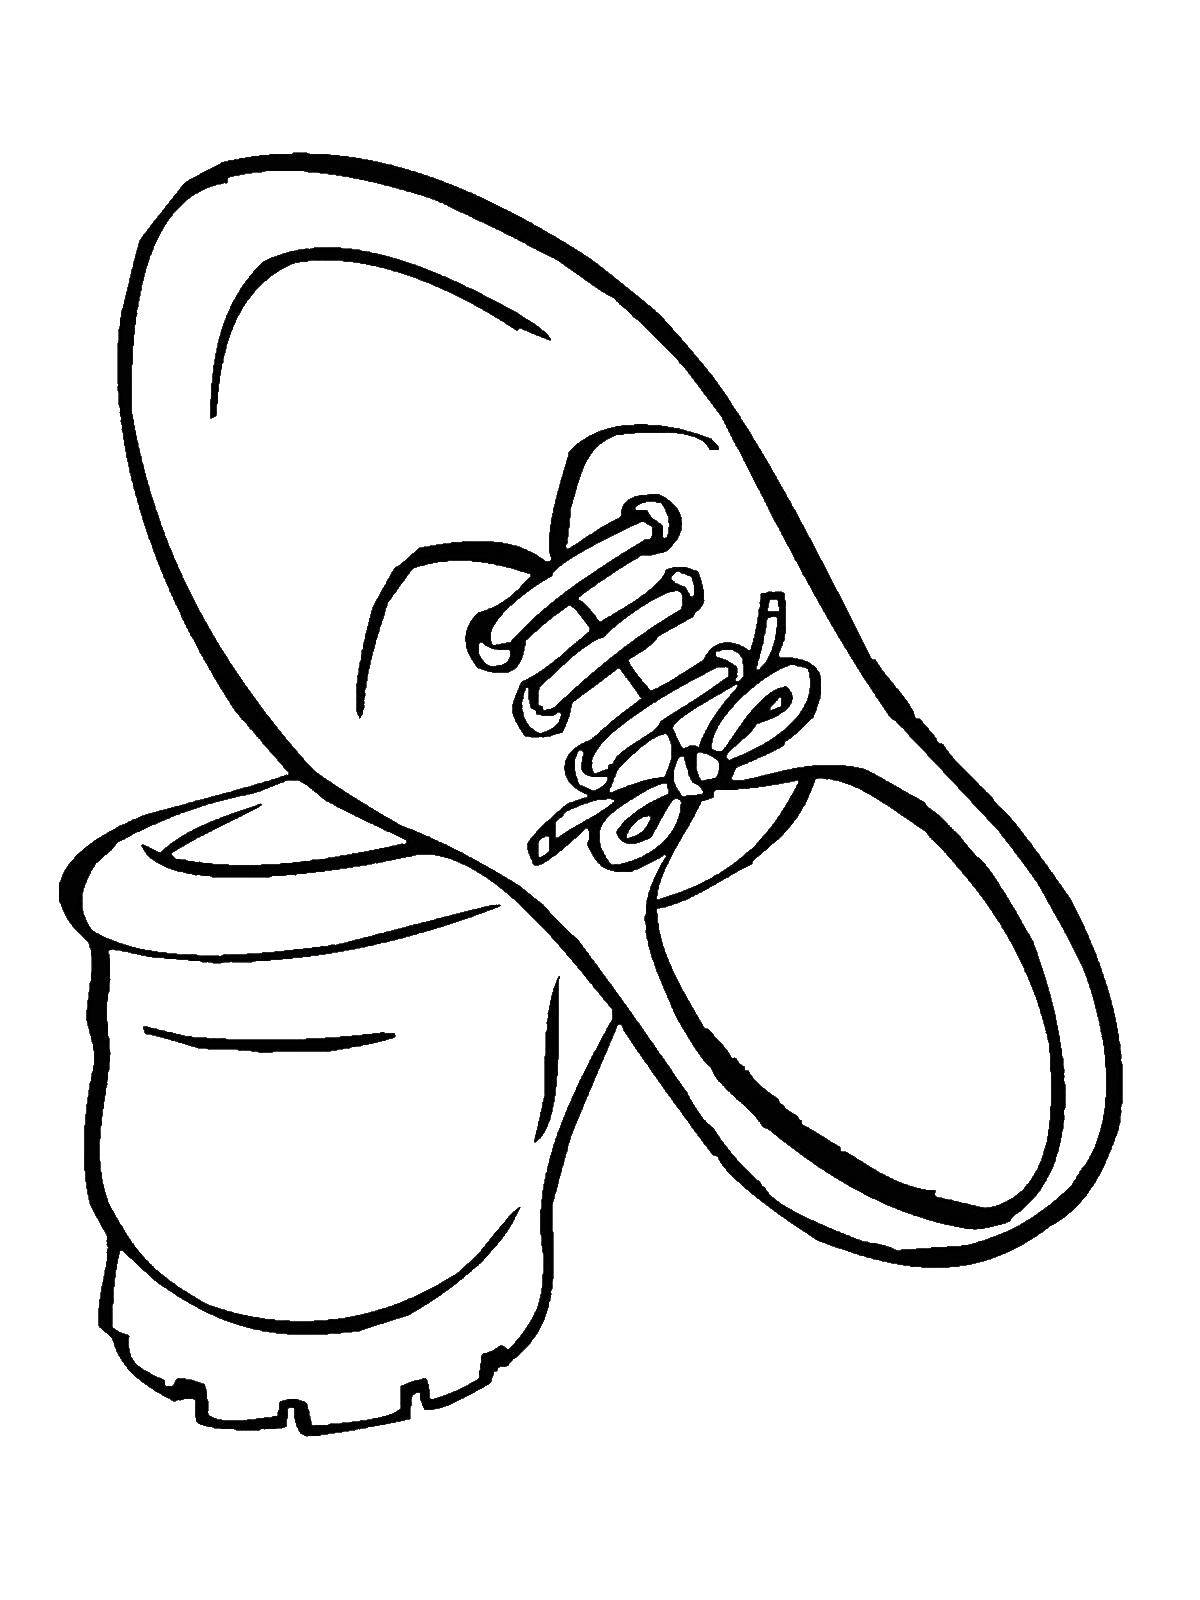 Coloring Sneakers lace-up. Category Clothing. Tags:  Shoes, sneakers, laces.